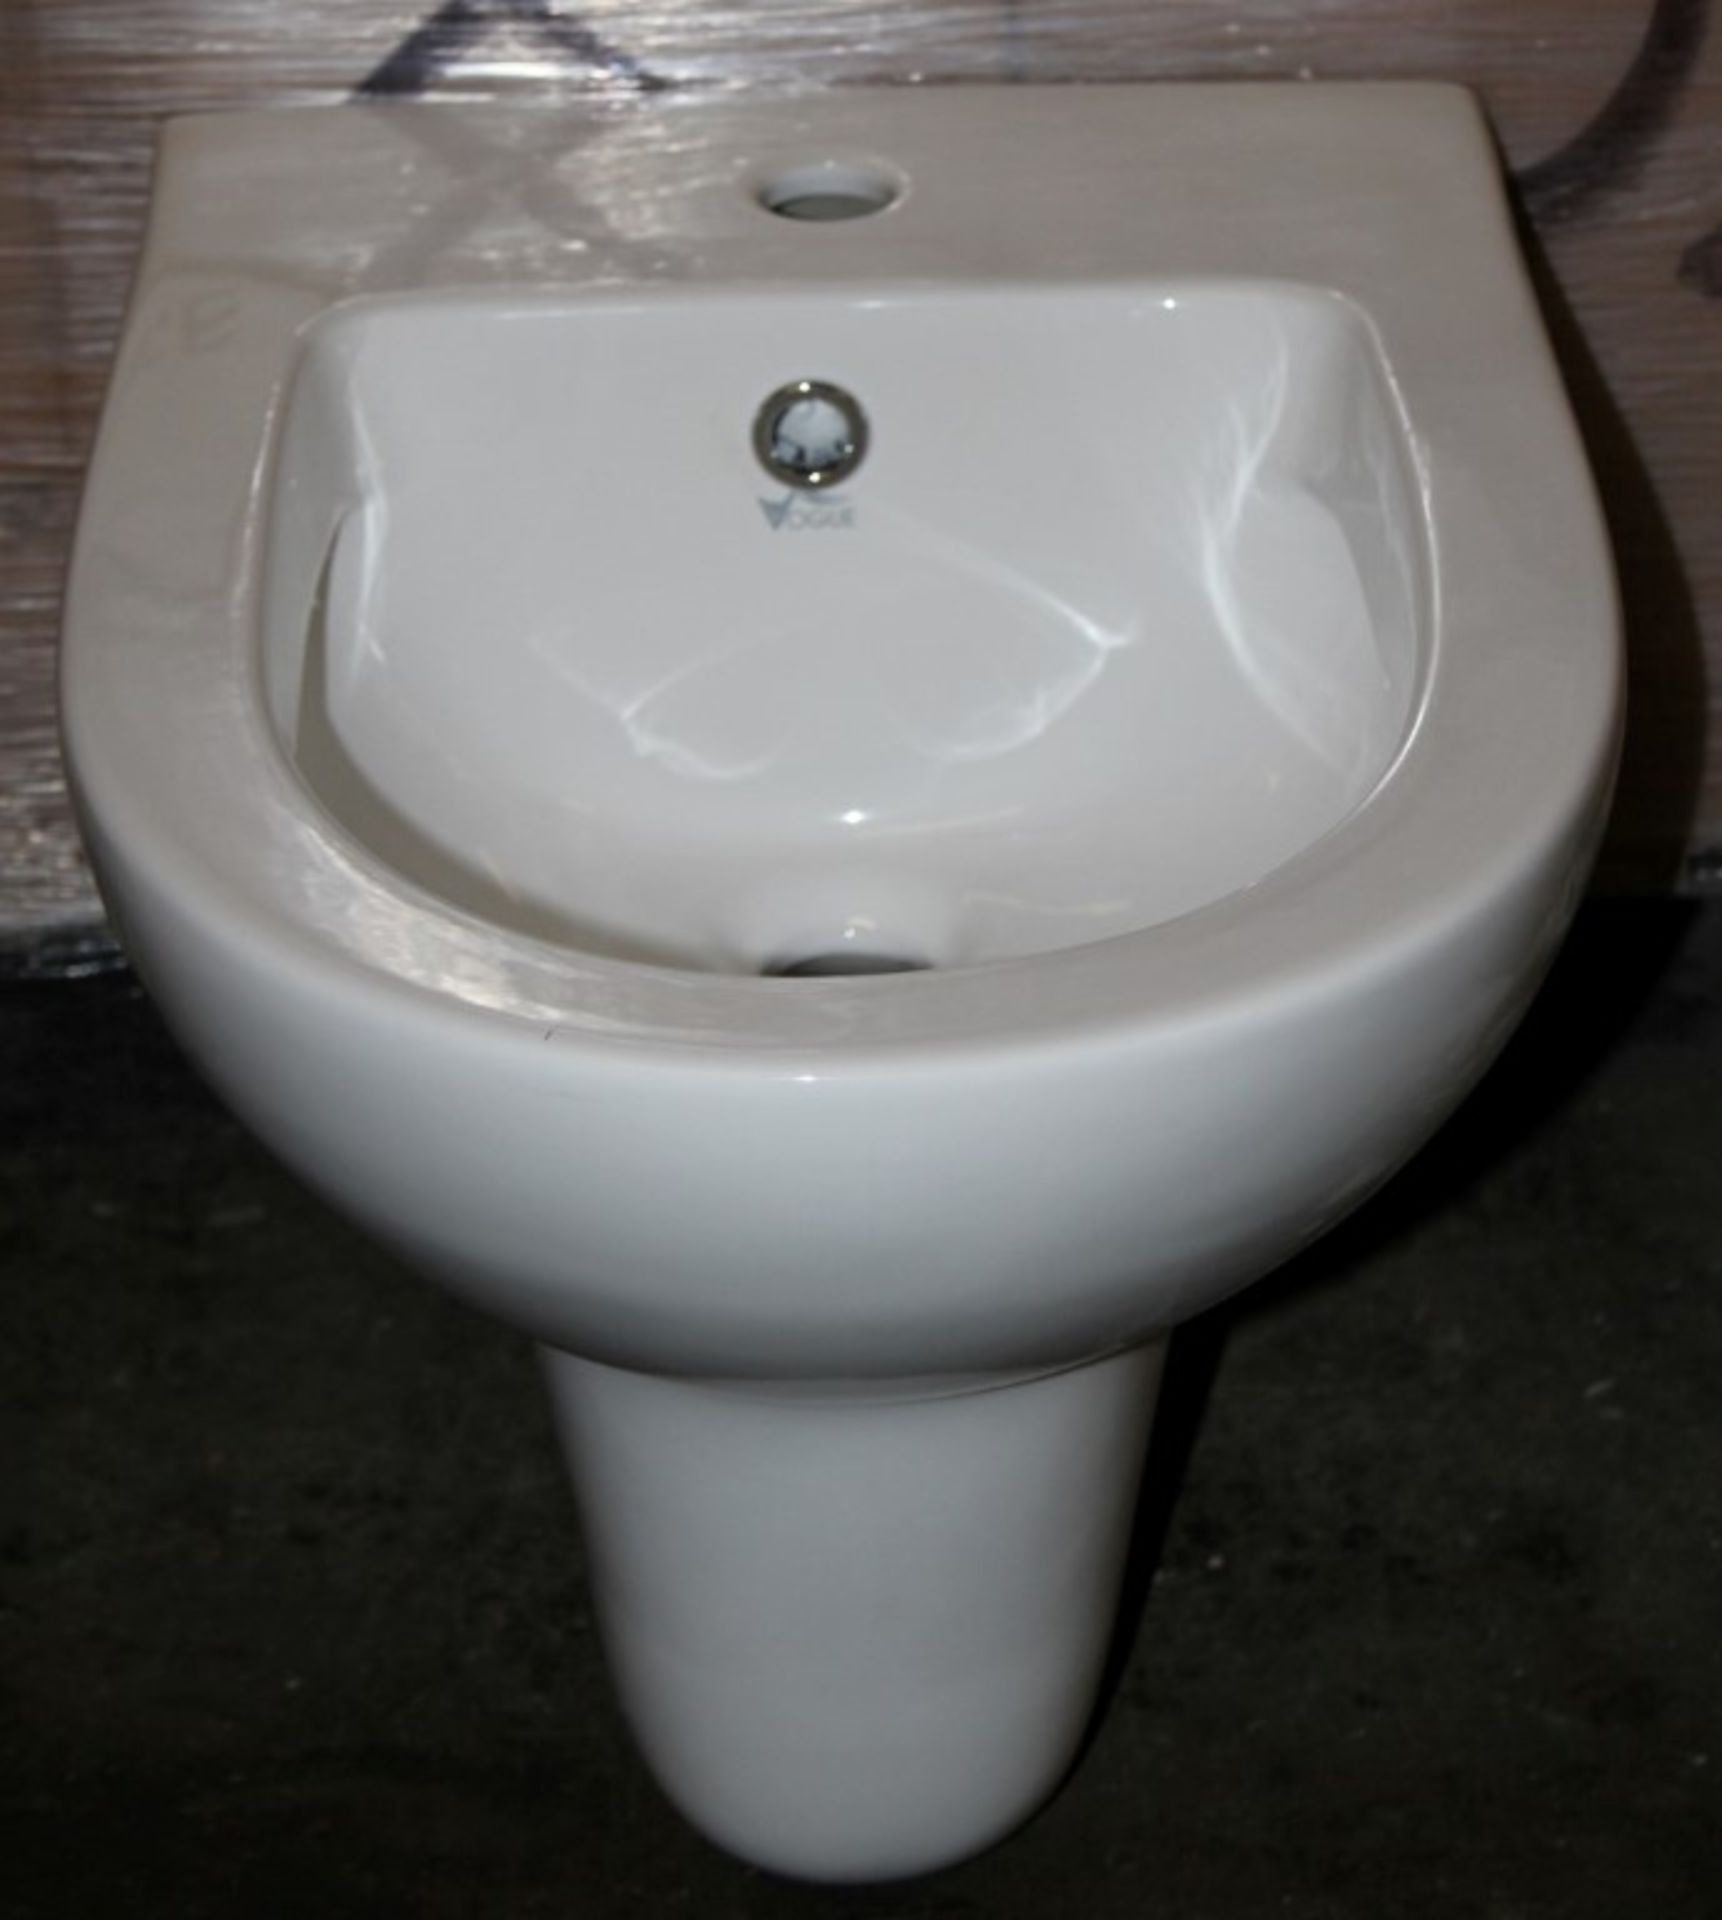 1 x Vogue Bathrooms KAMARA Single Tap Hole WALL HUNG BIDET - Brand New and Boxed - High Quality - Image 2 of 4